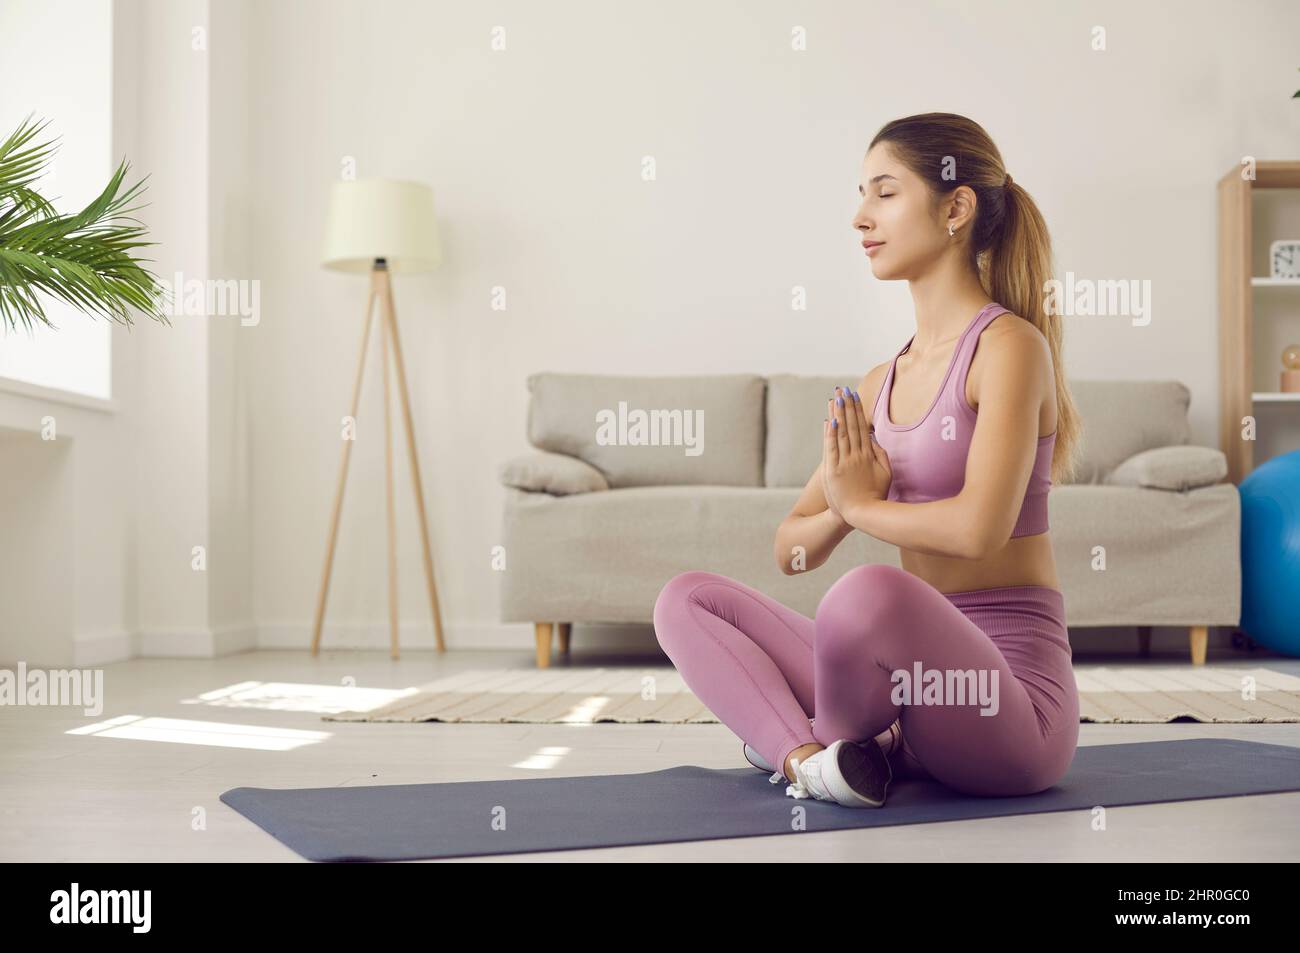 Calm girl practice yoga meditate at home Stock Photo